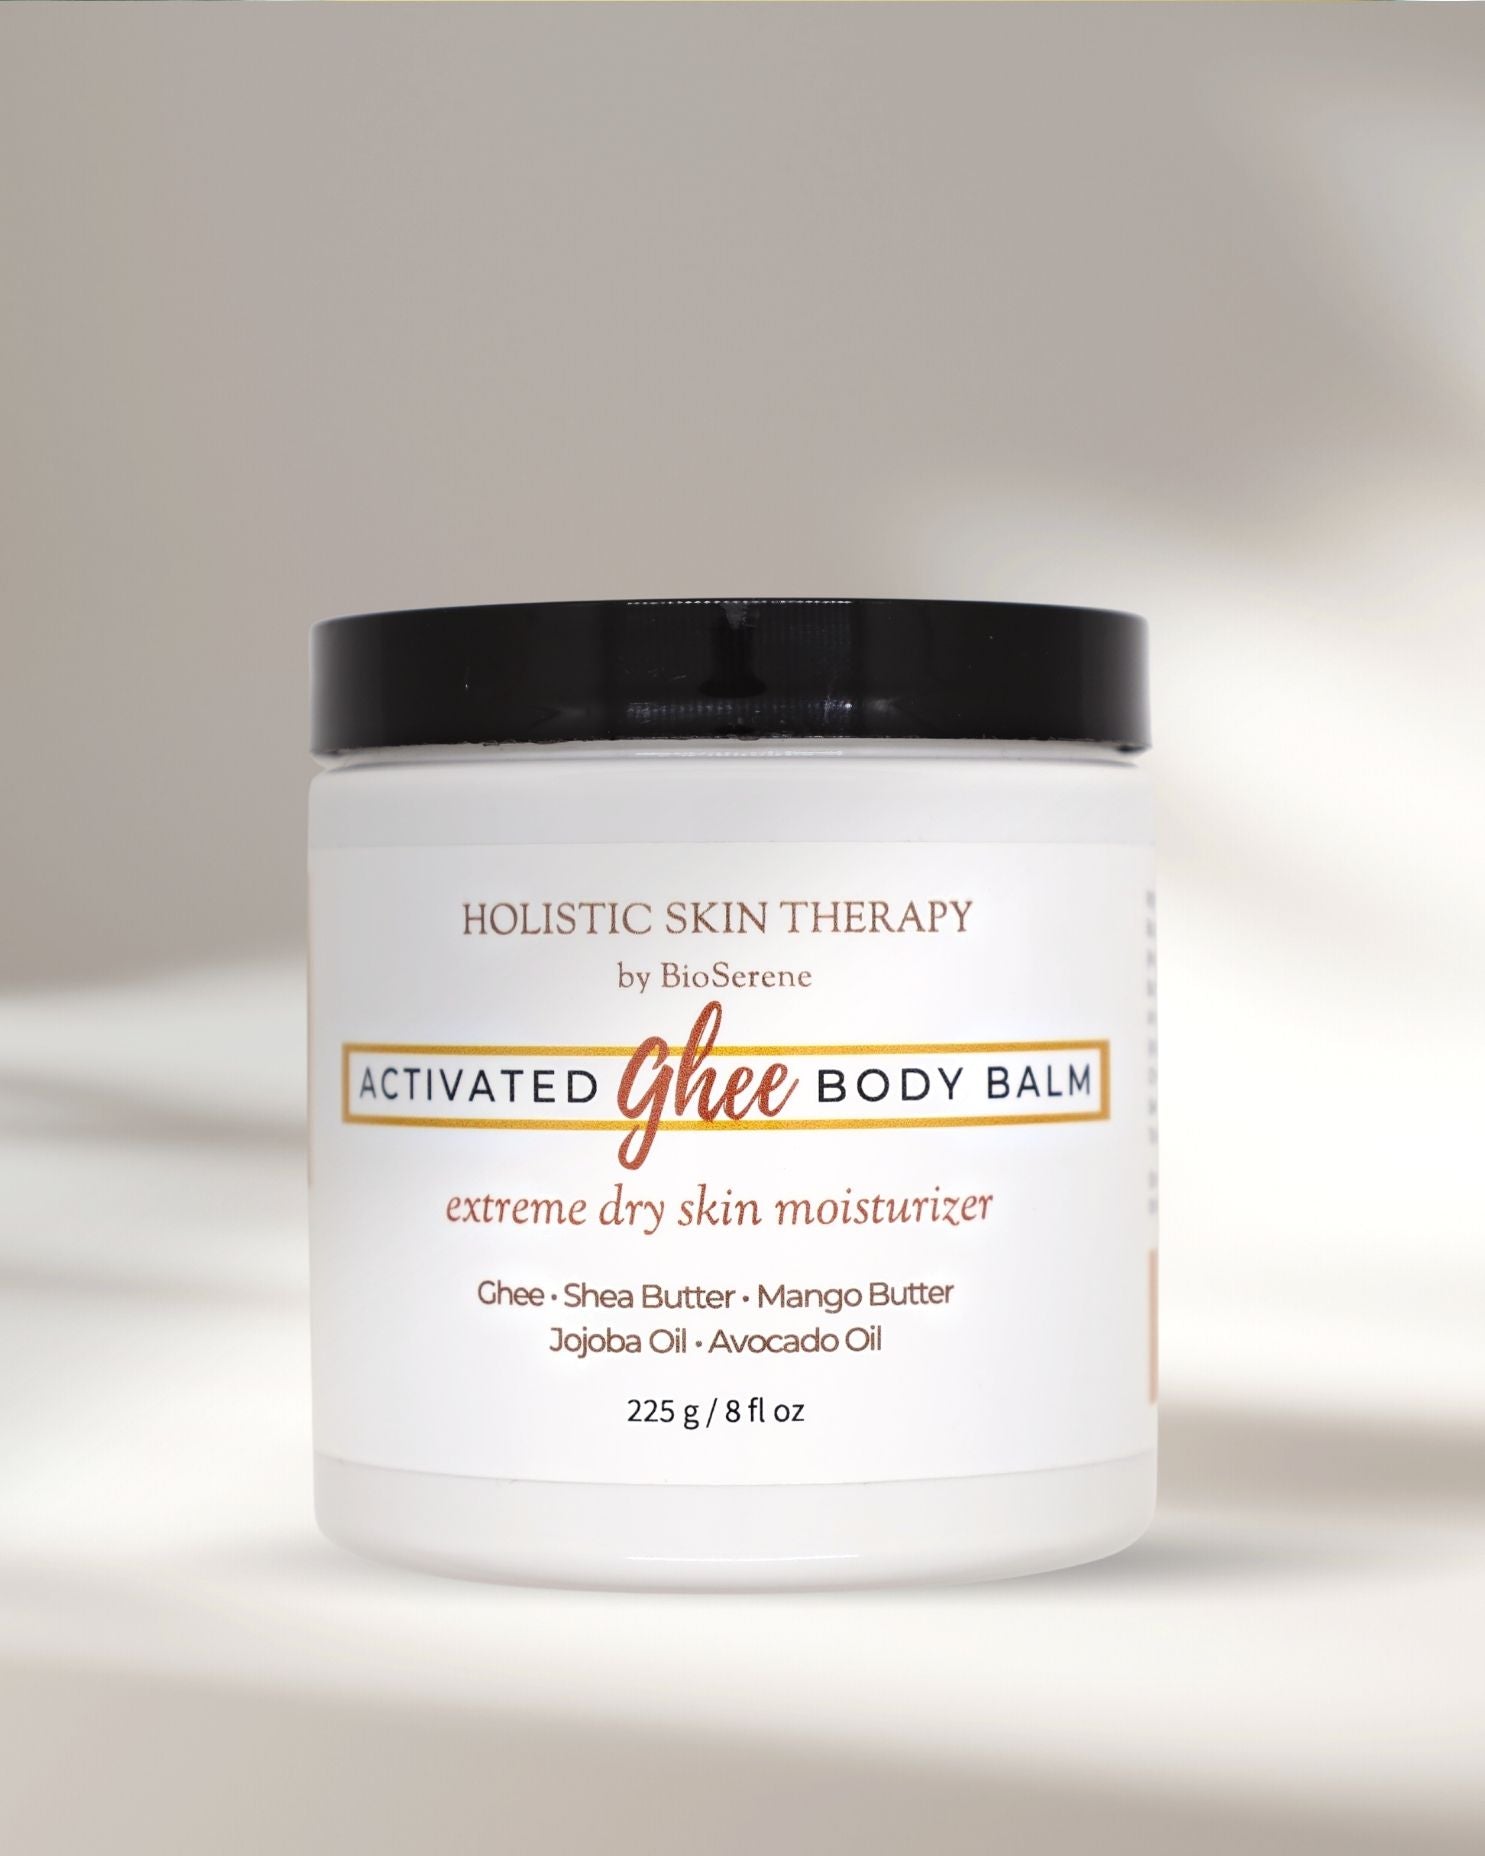 Activated Ghee Body Balm - Extra Dry Skin Moisturizer